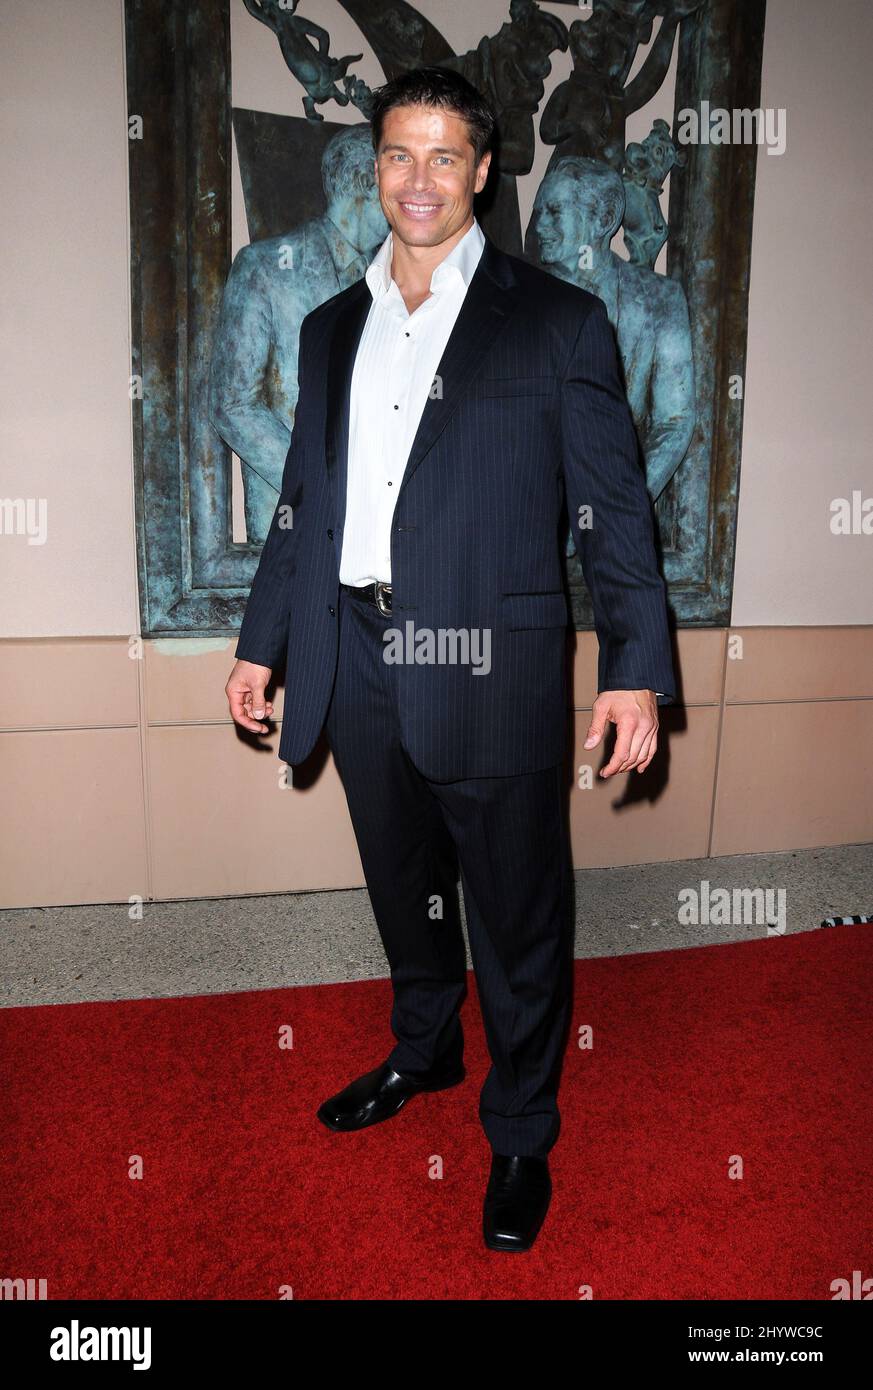 Roland Kickinger at the 'Raven' World Premiere, held at the Academy of Television Arts and Sciences, Hollywood. Stock Photo